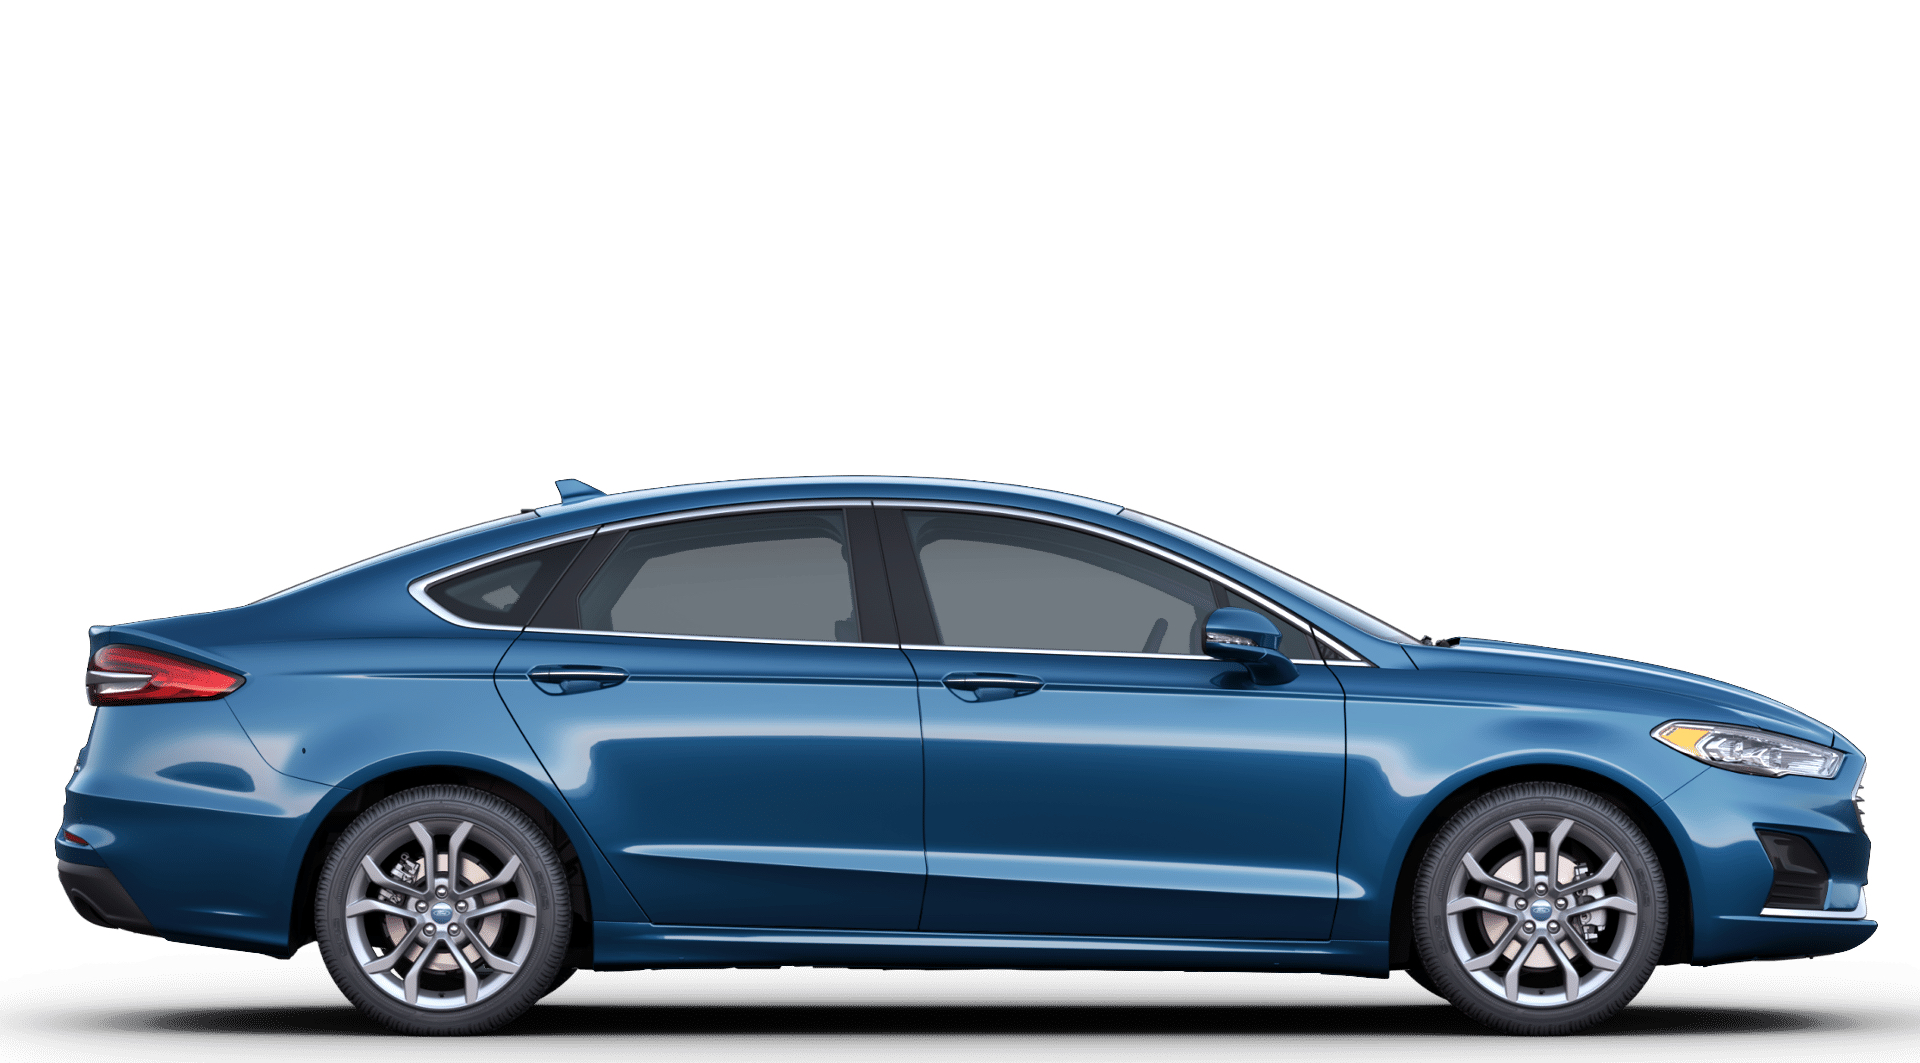 New Velocity Blue Color For The 2019 Ford Fusion: First Look